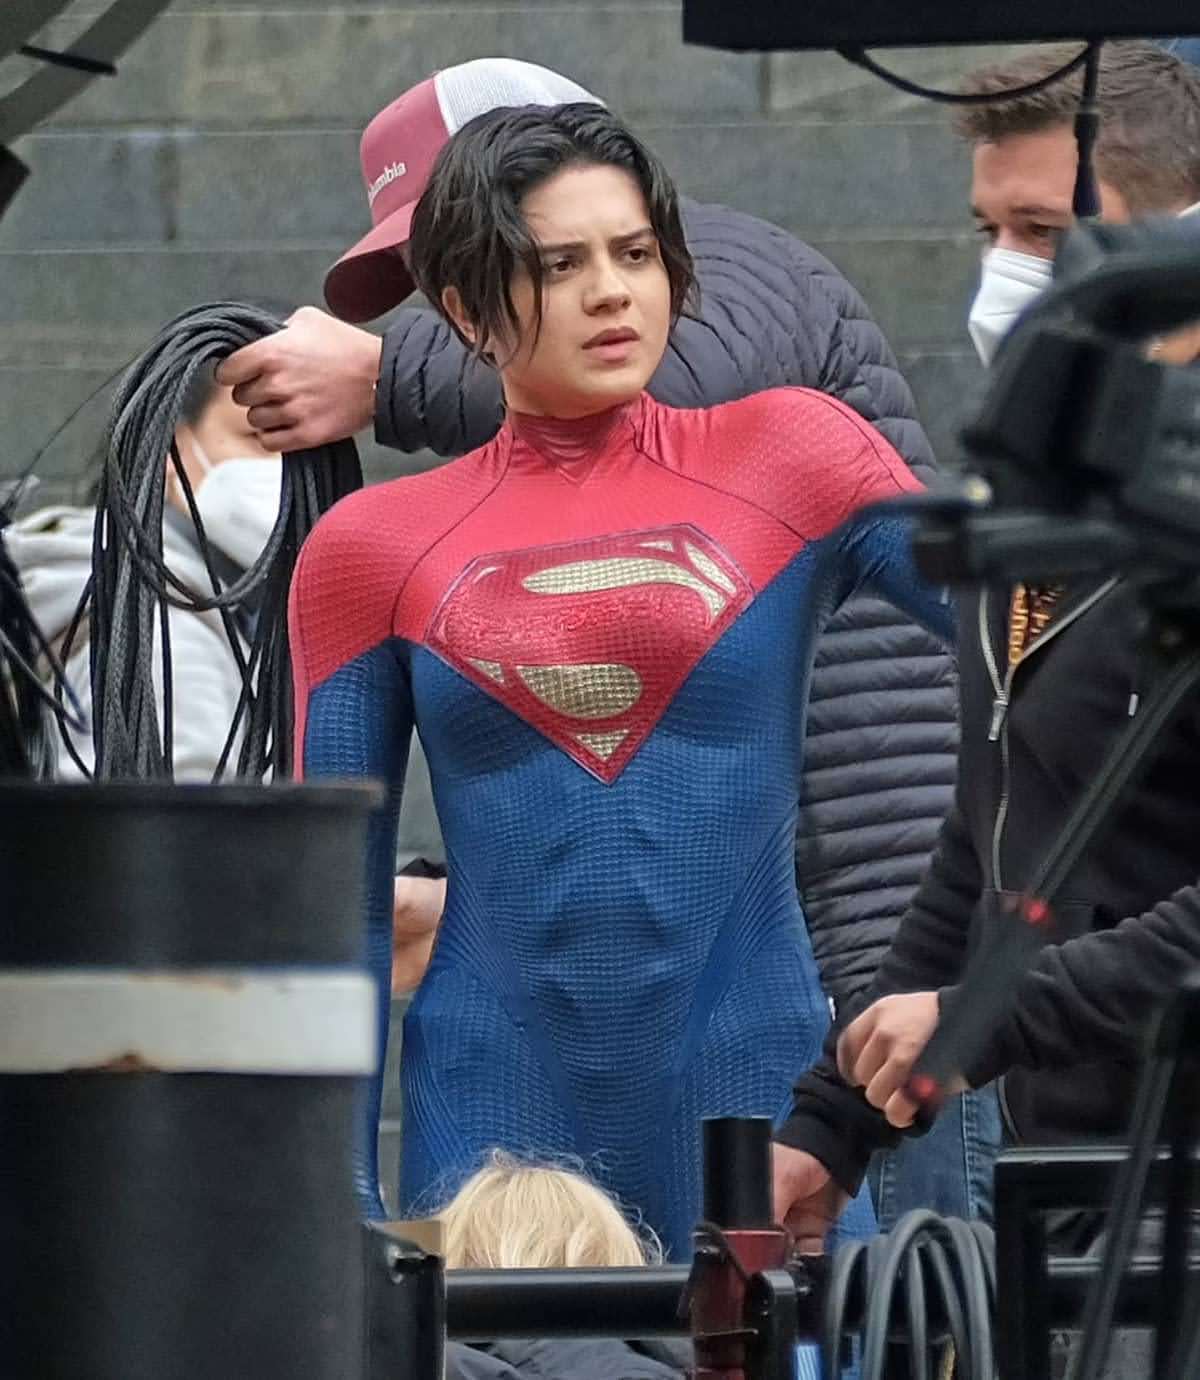 Sasha Calle As Supergirl On The Set Of The Flash 超高速ヒーロー単独主演の Dc 映画の最新作 ザ フラッシュ の最大の注目のサーシャ カレが演じる新しいスーパーガールが登場したセット フォット B Side Of Cia